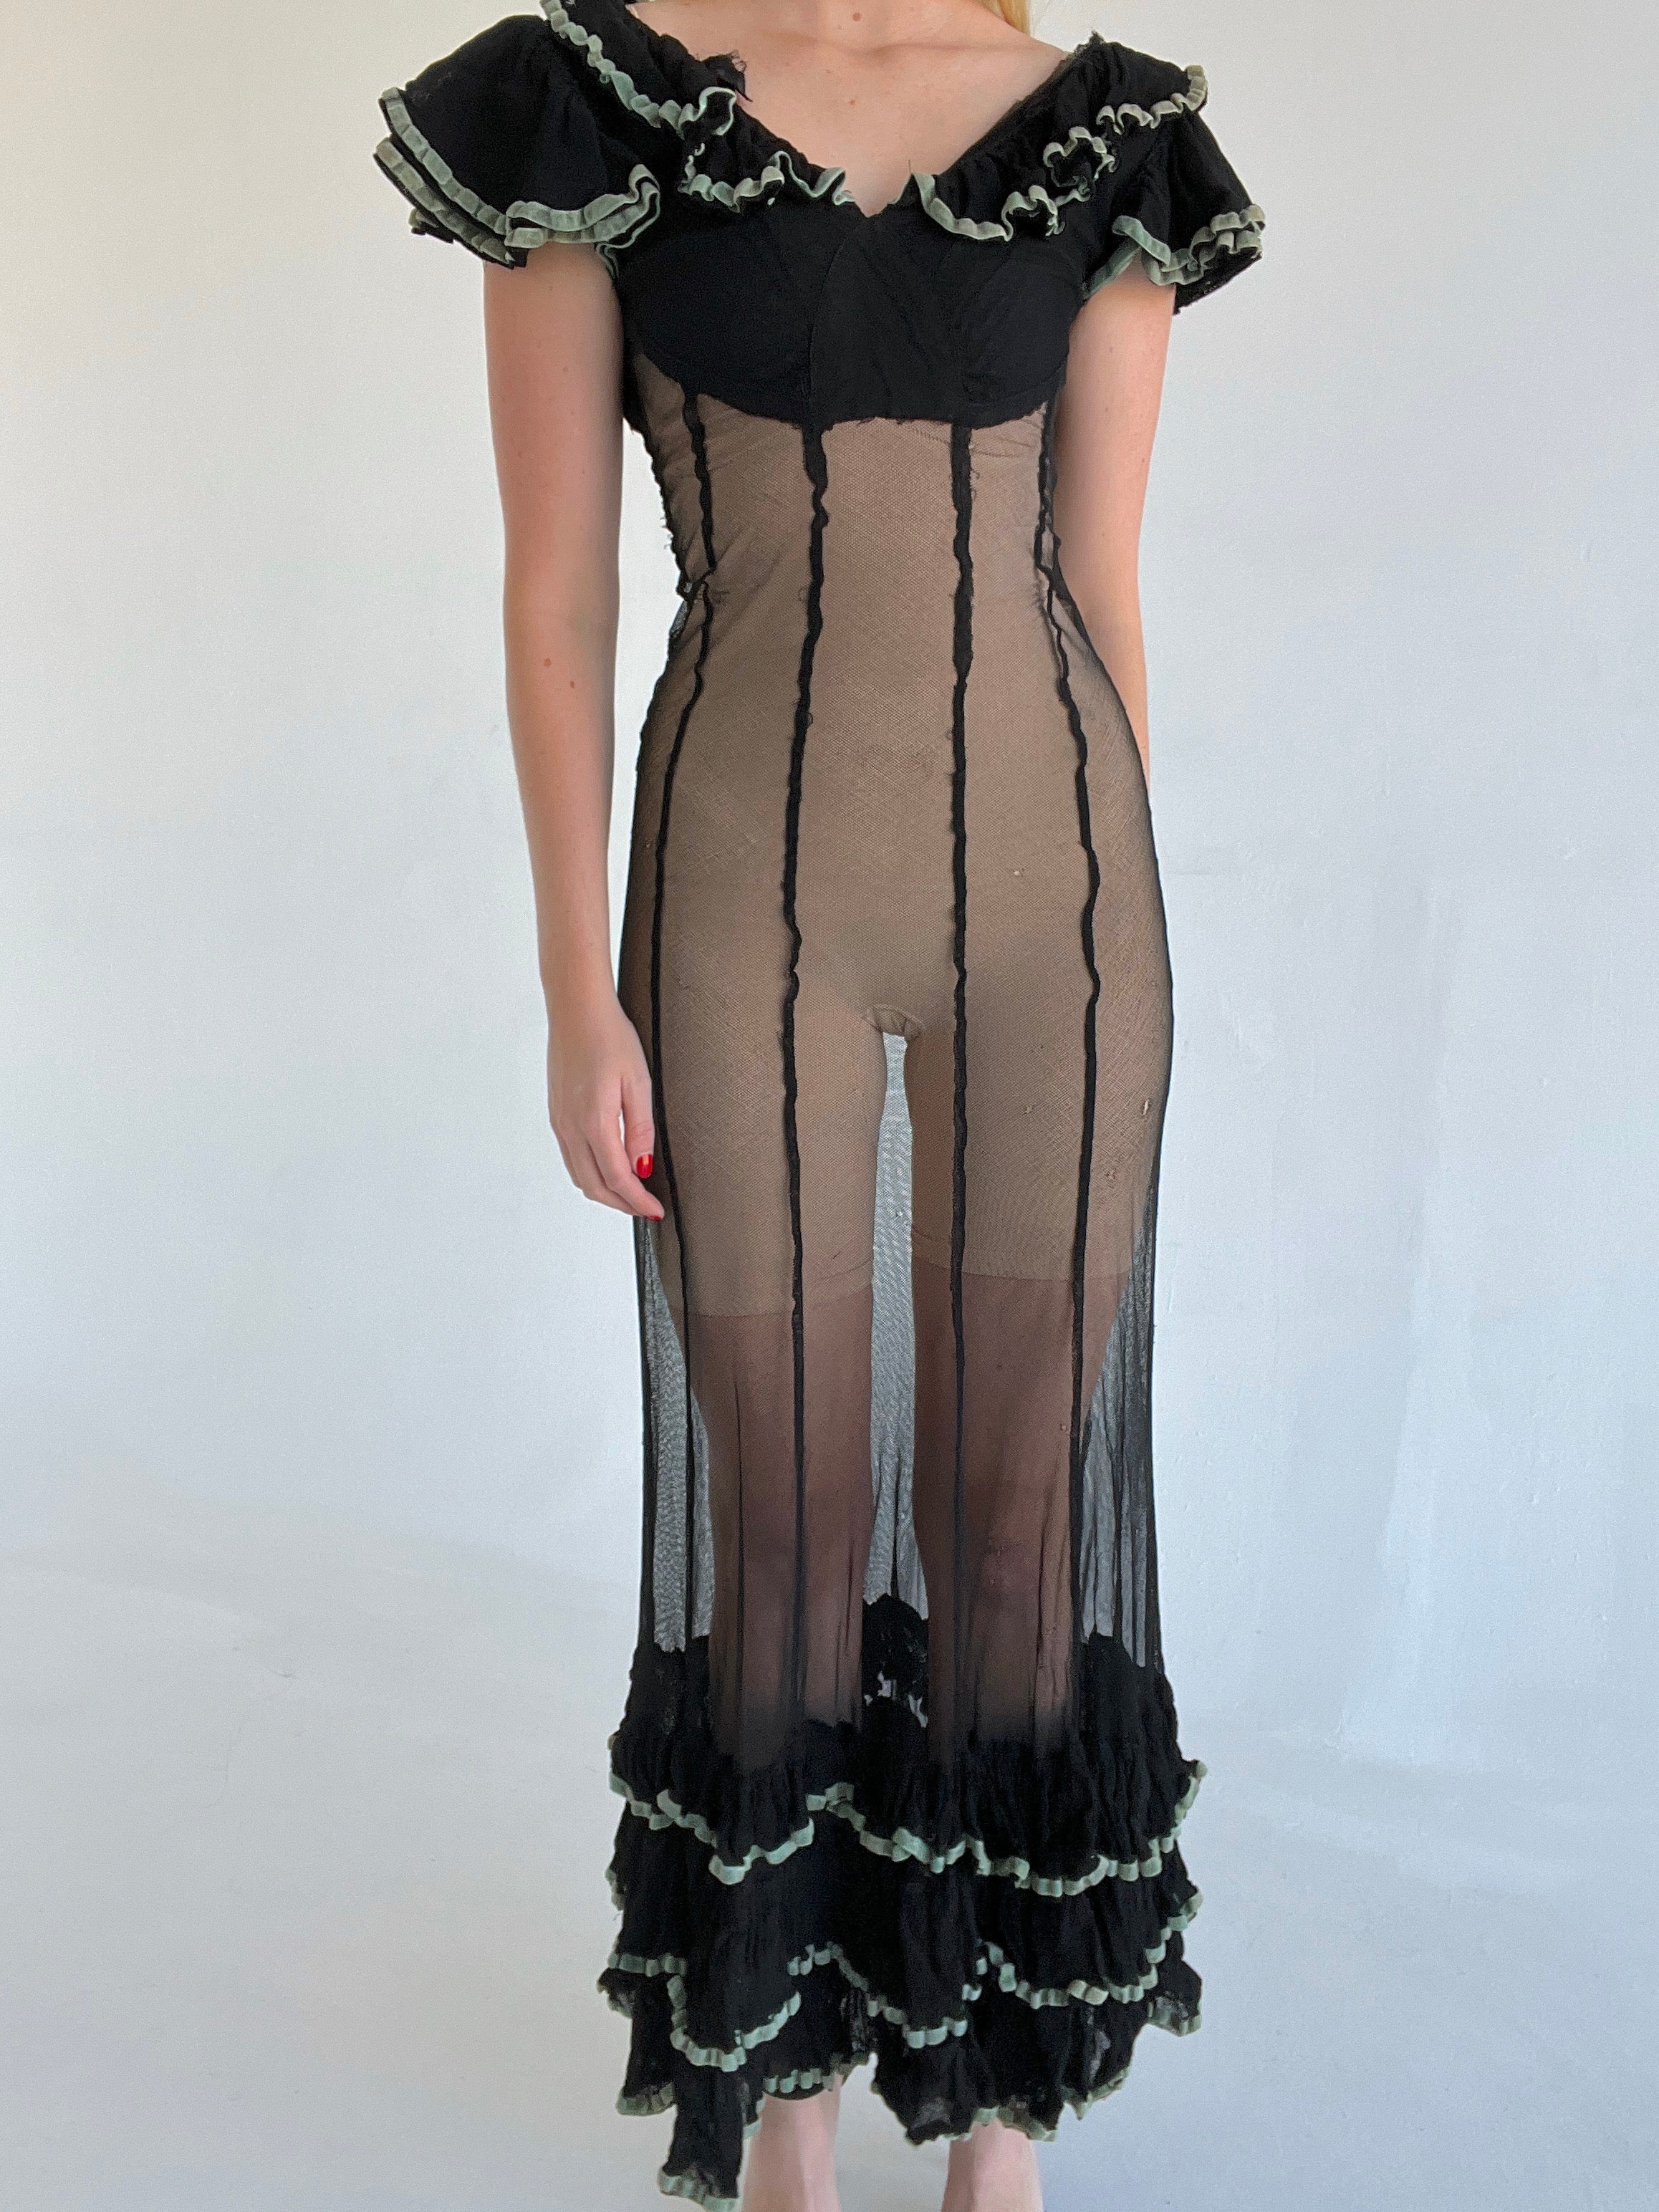 1930's Black Net Dress With Tiered Ruffles